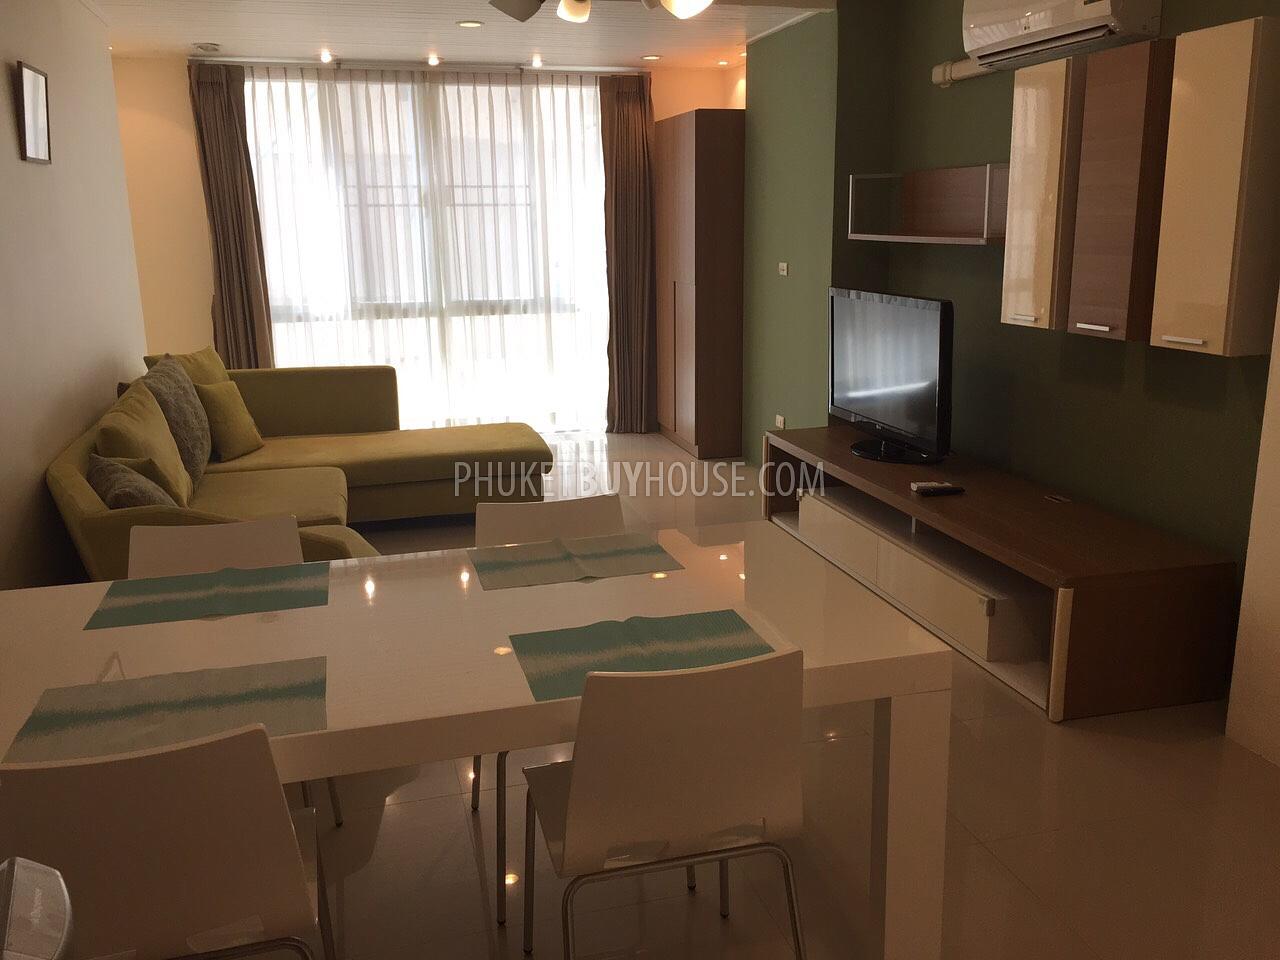 PAT5118: One bedroom apartment in the heart of Patong. Фото #11